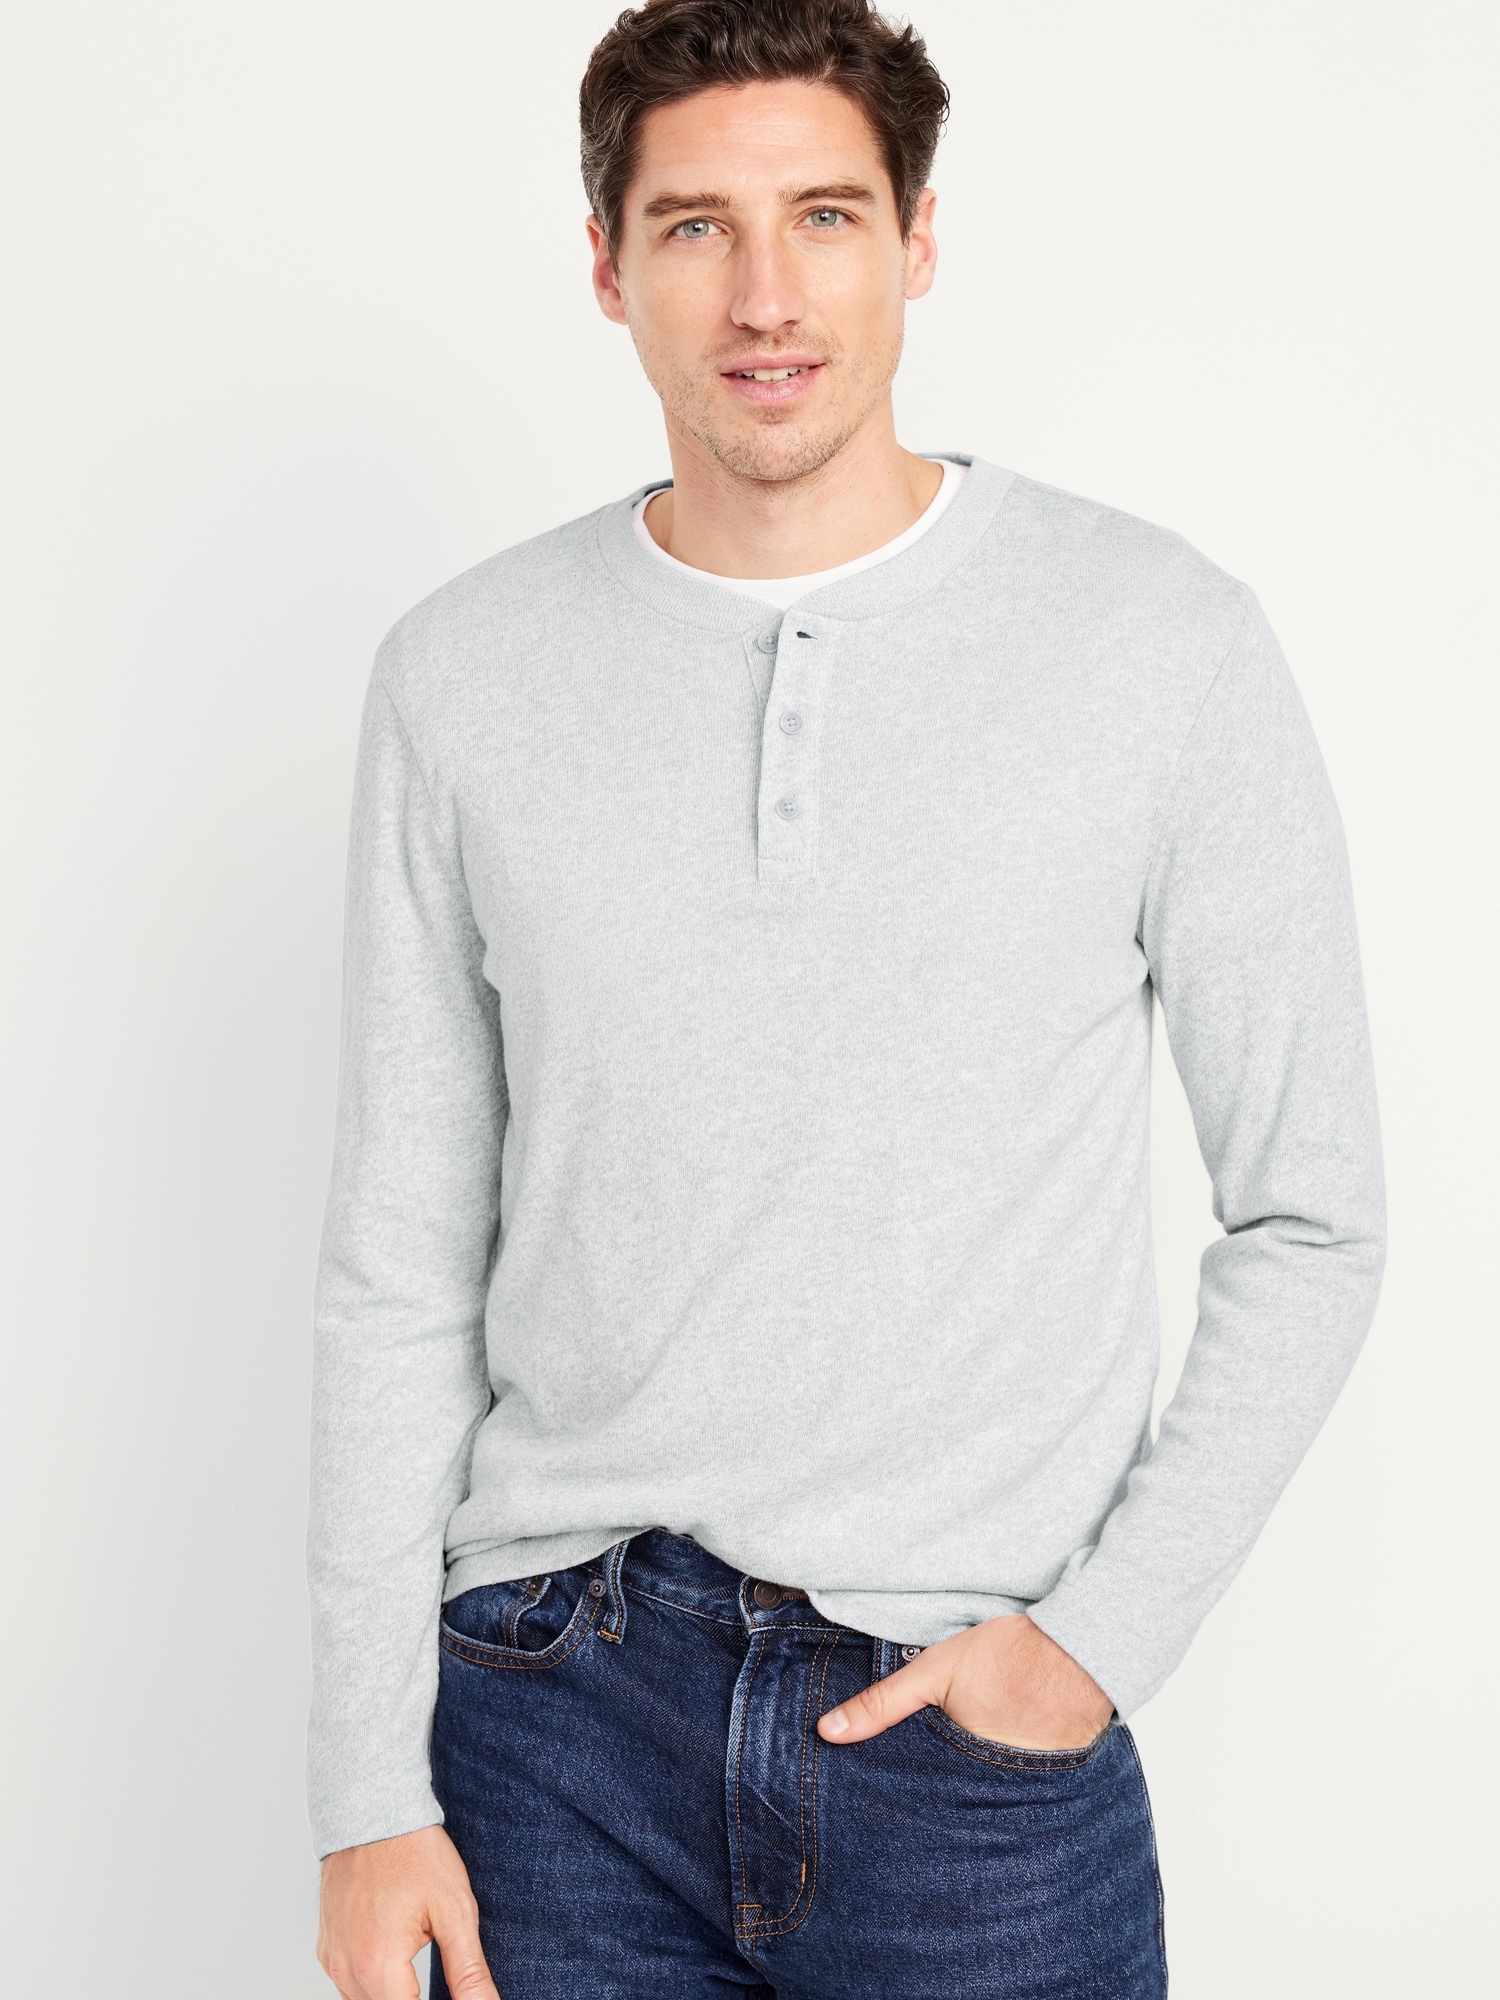 Men Long Sleeve T Shirts Tops Casual Henley V Neck Tee Slim Fit Button  T-shirt Blouses